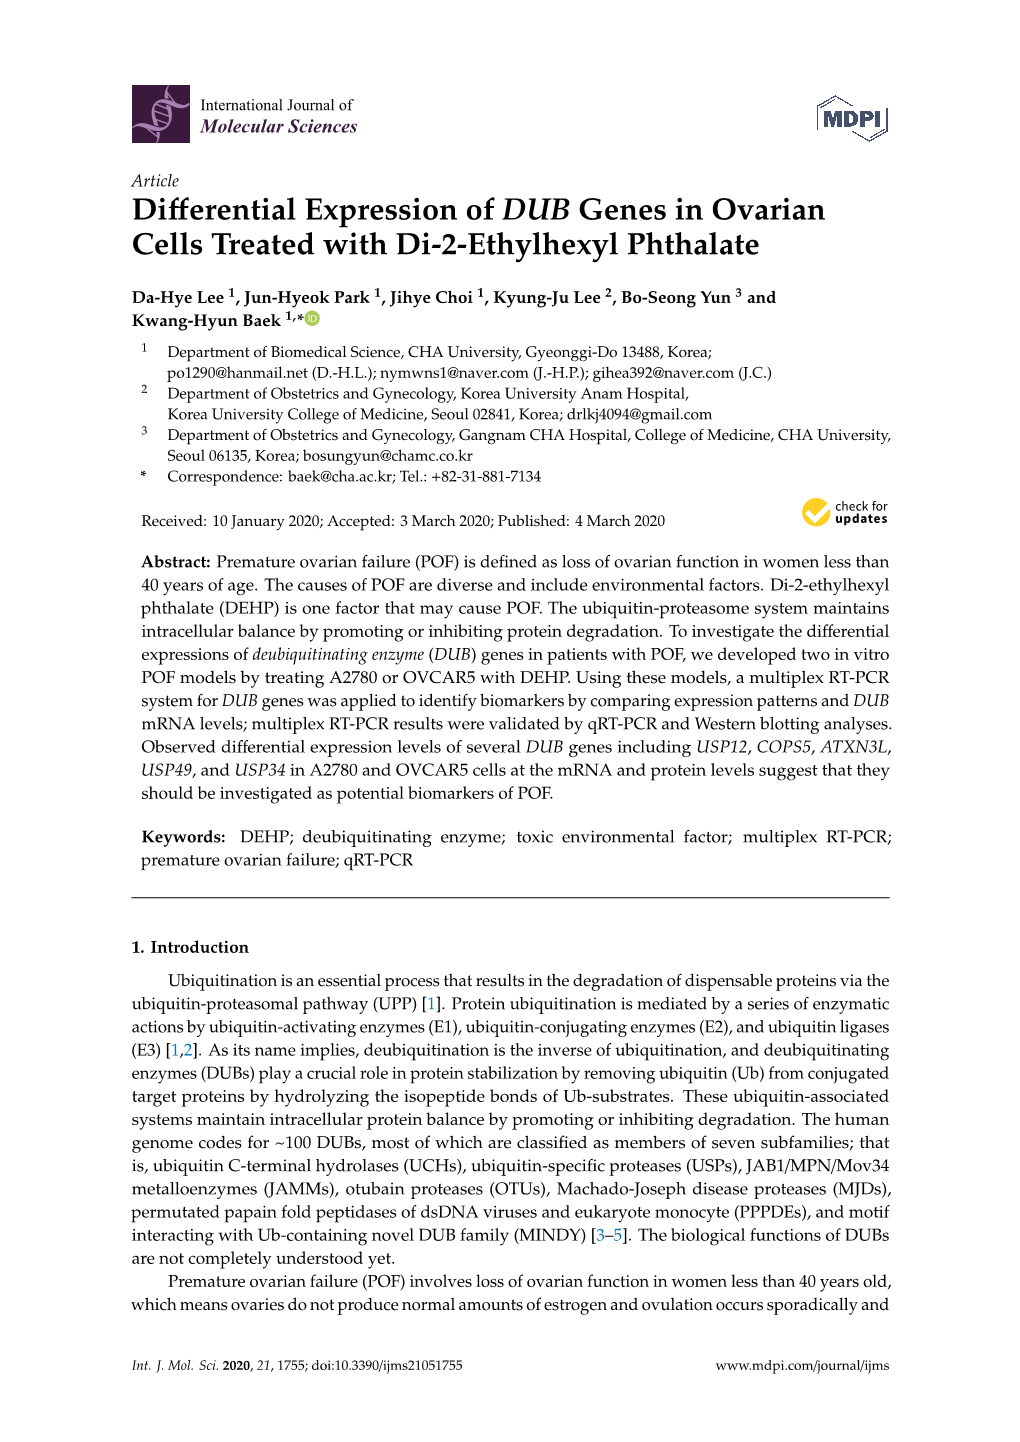 Differential Expression of DUB Genes in Ovarian Cells Treated with Di-2-Ethylhexyl Phthalate